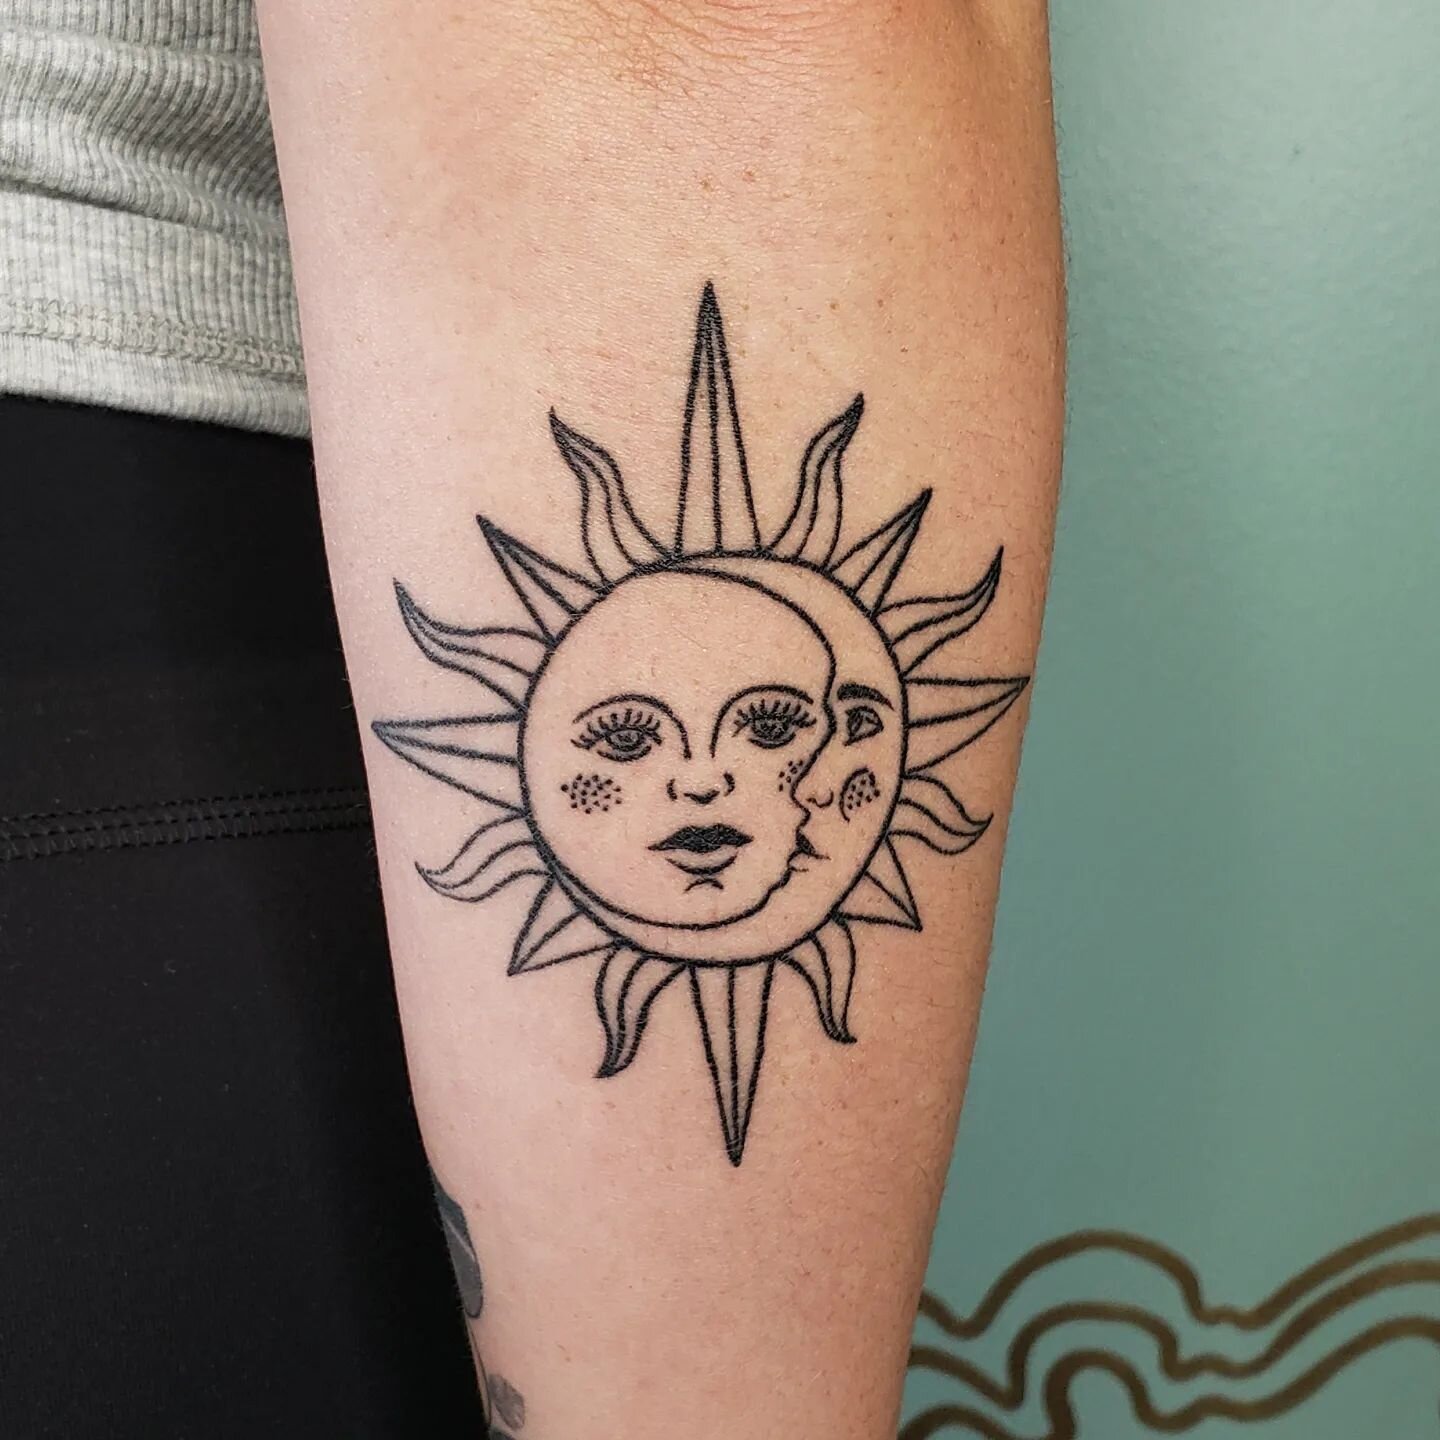 3 months healed. Thank you, Courtney 🖤
.
.
.
I&rsquo;m at @jadeanddaggertattoo just off 17th Ave. Email spinster.tattoo@gmail.com with your tattoo hopes &amp; dreams ♡
.
.
.
.
.
.
.
#SunMoonTattoo #SunAndMoon #HealedTattoo #Tattoo  #IllustrativeTatt